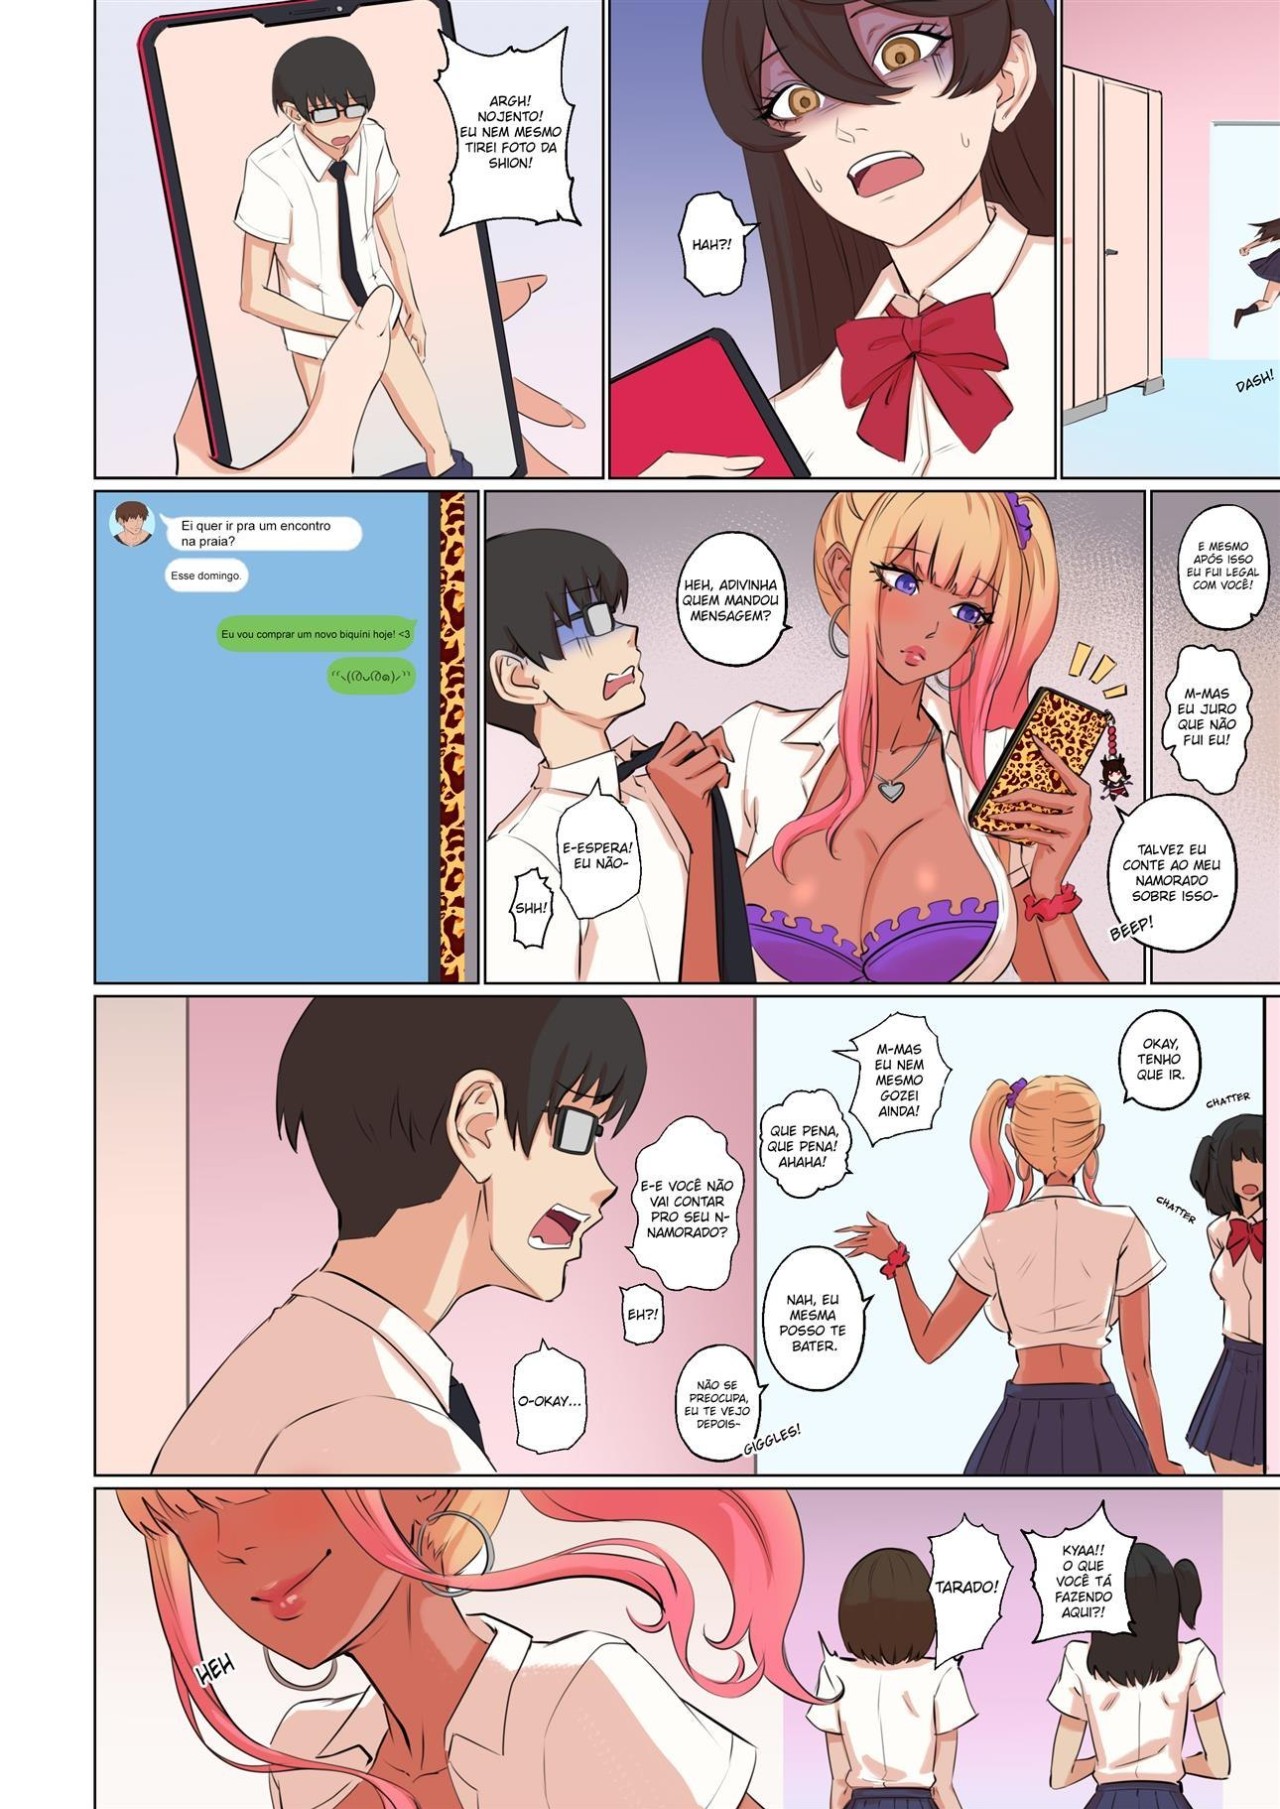 My Shy Best Friend Turned Into a Gal Girl Hentai pt-br 32